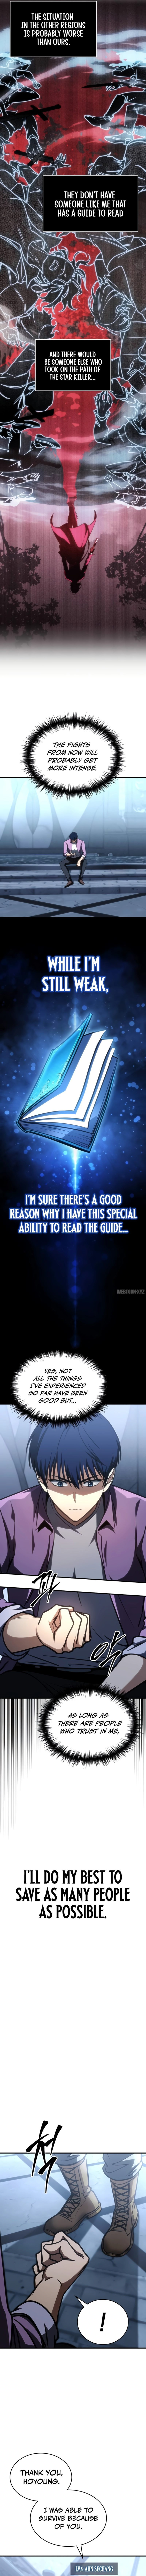 My Exclusive Tower Guide - Chapter 12 Page 9